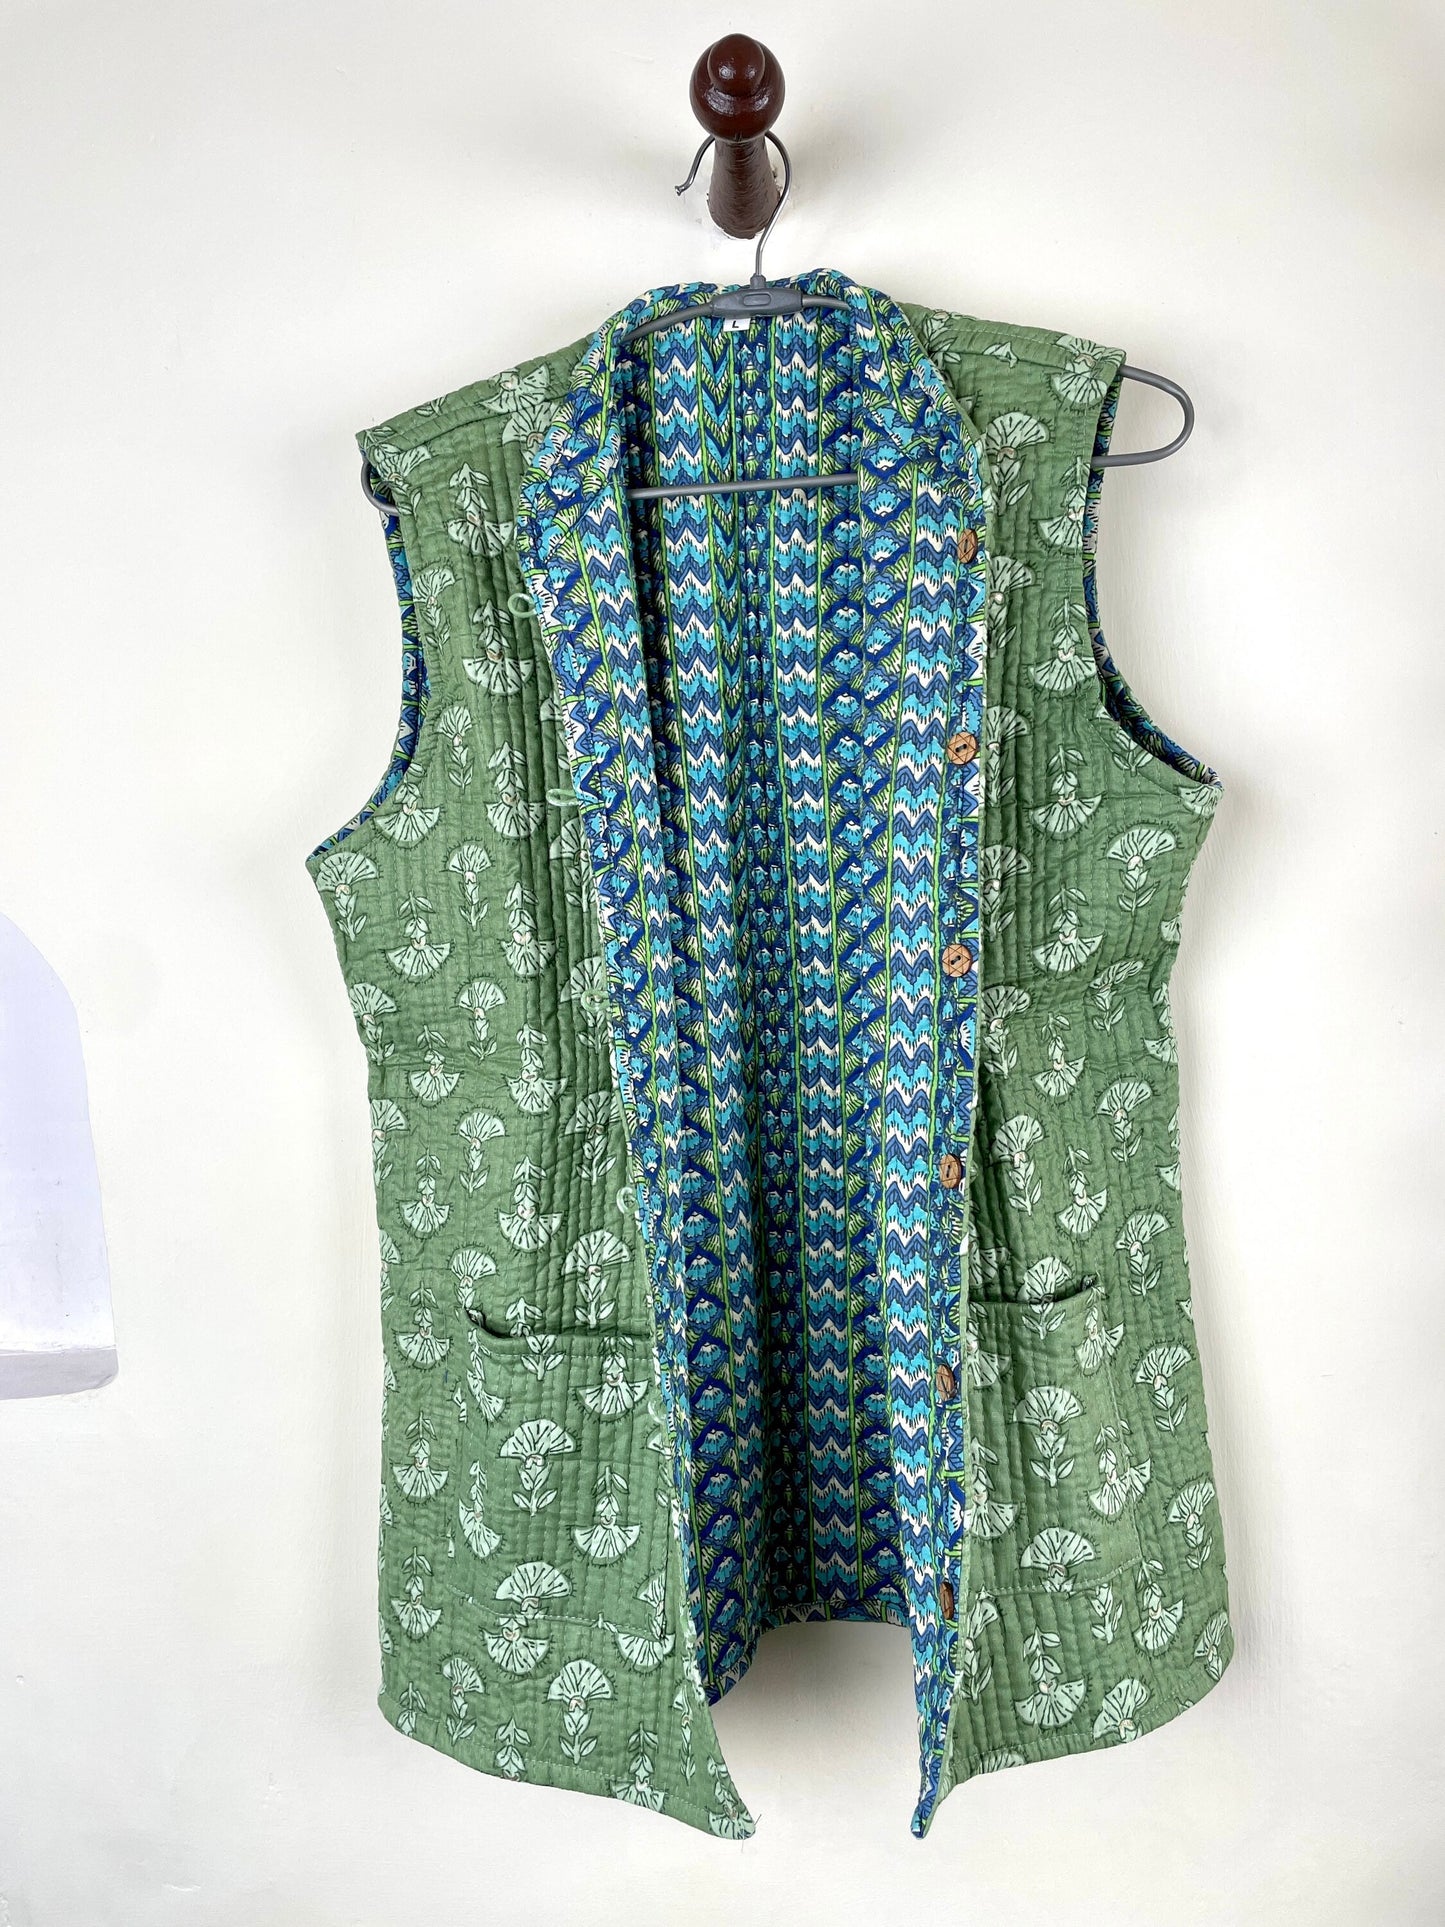 Indian Handmade Quilted Cotton Sleeveless Jacket Green & Blue Stylish Women's Coat, Reversible Jacket for Her